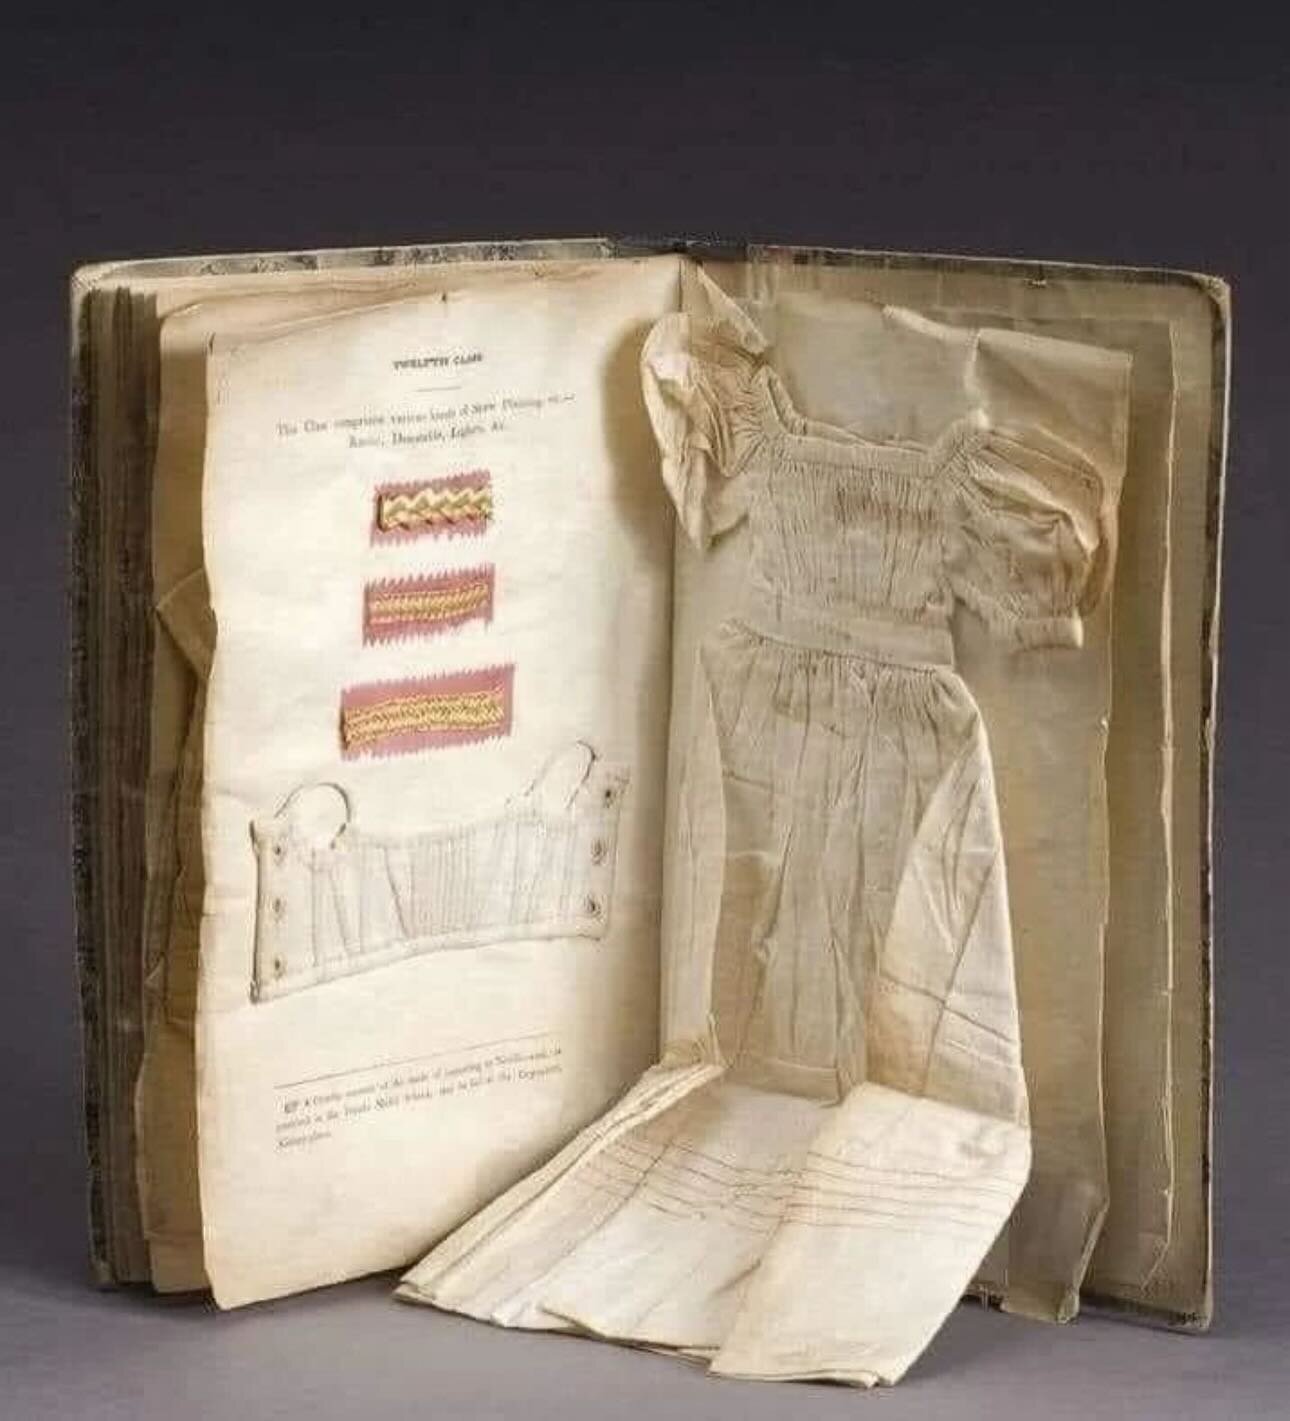 An antique Irish needlework instruction book which contains samples of sewing, darning, embroidery, knitting and miniature clothing. 
The cover is inscribed &lsquo;Sarah Darby, 1837&rdquo;.

RG @librarian.space via @eylandgentle 

#antiquebook #sewin